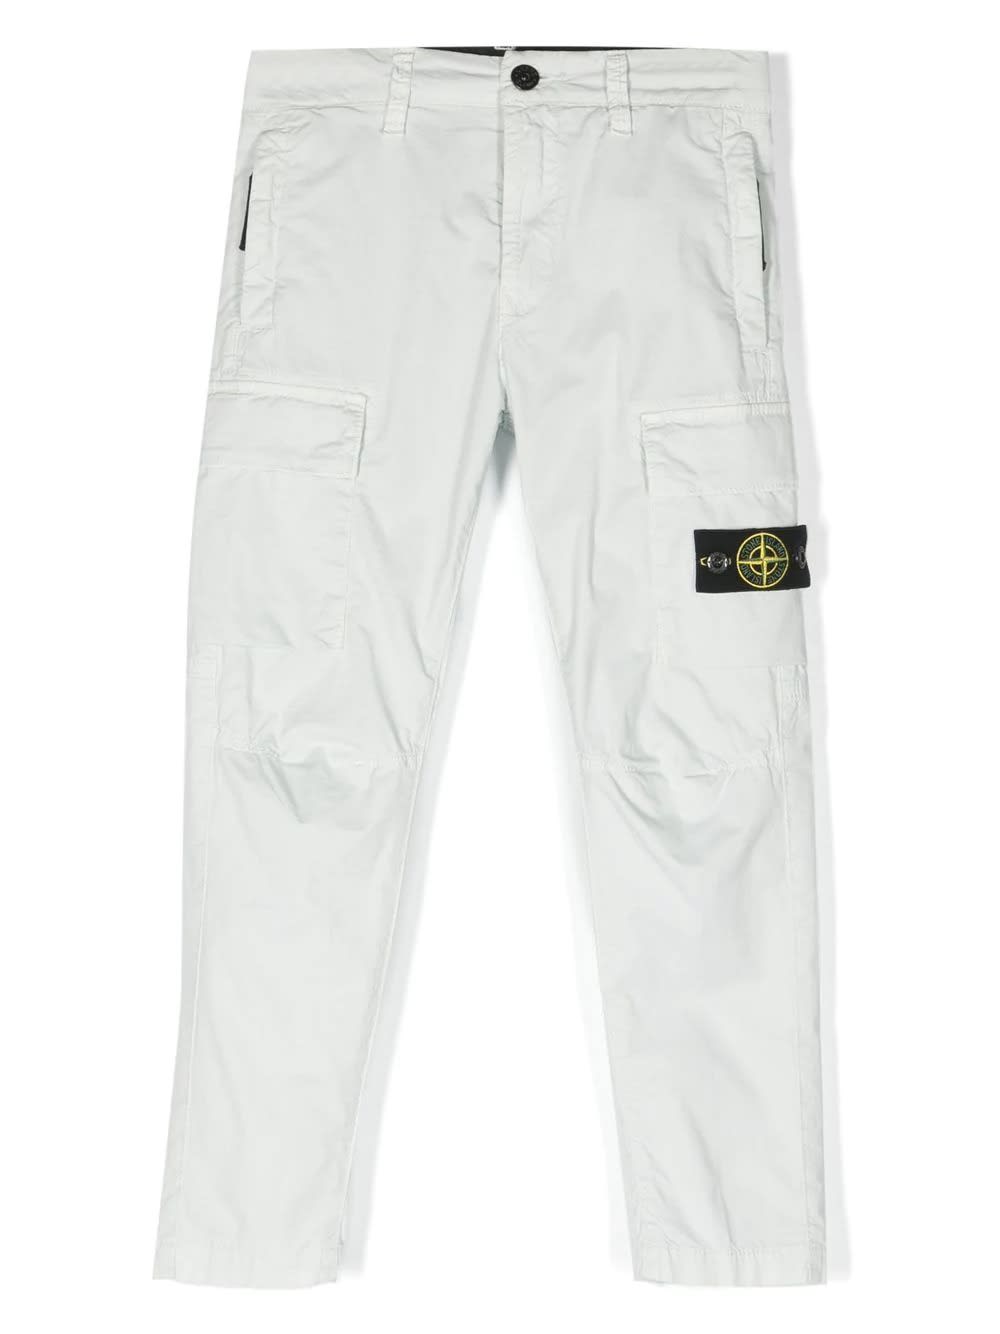 STONE ISLAND JUNIOR PEARL GREY CARGO TROUSERS WITH BADGE